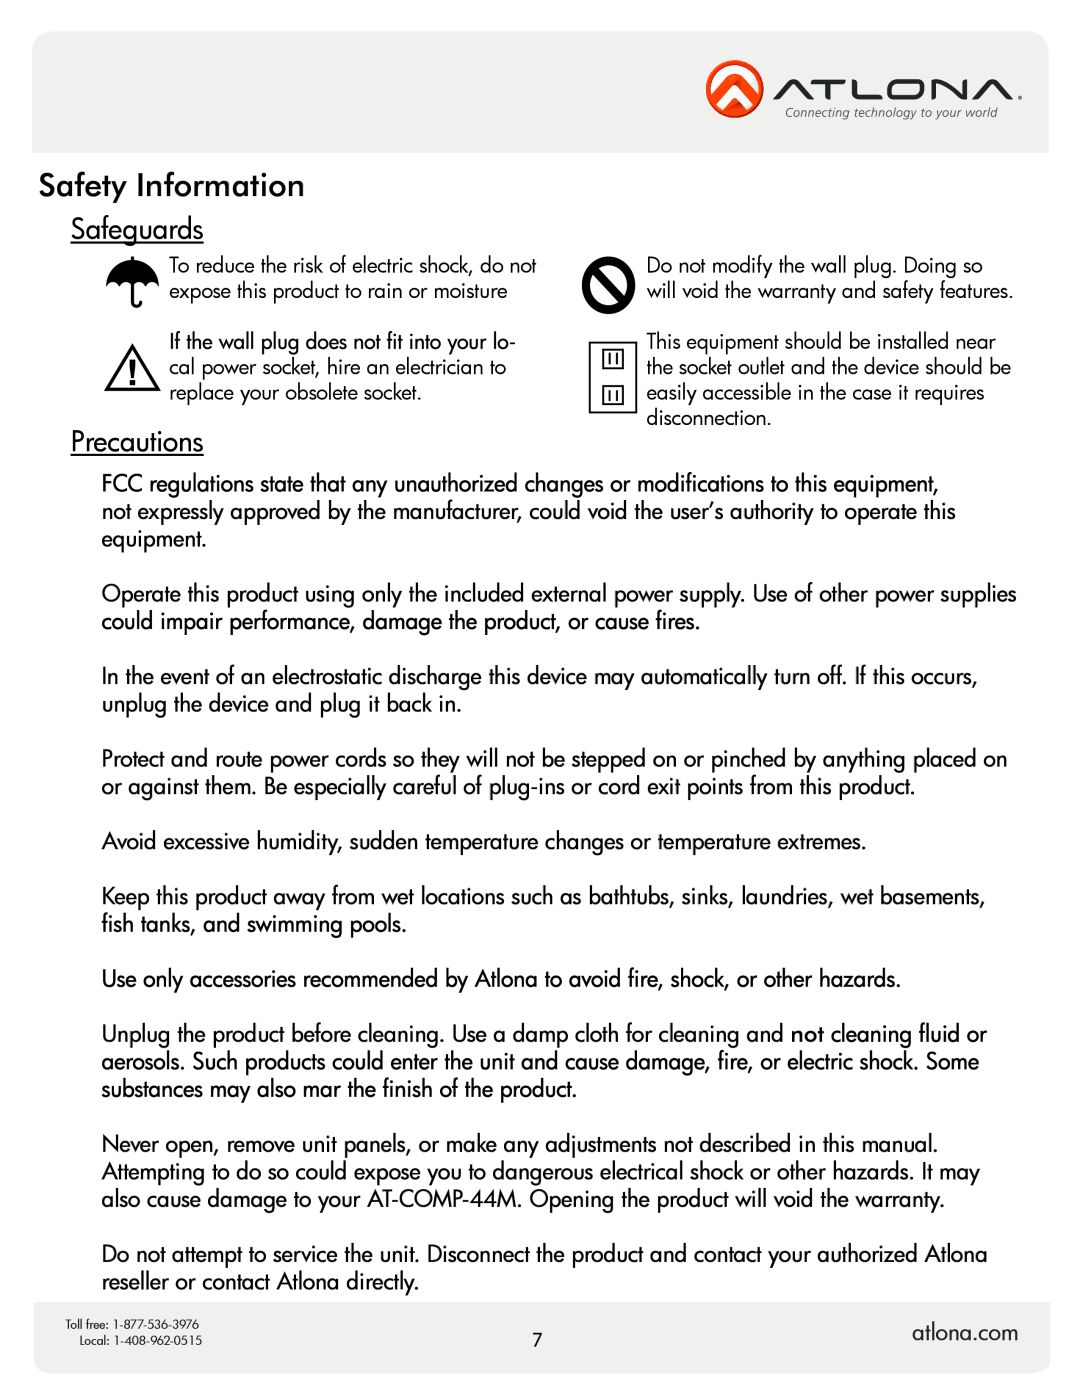 Atlona AT-COMP-44M user manual Safeguards, Precautions, Safety Information 